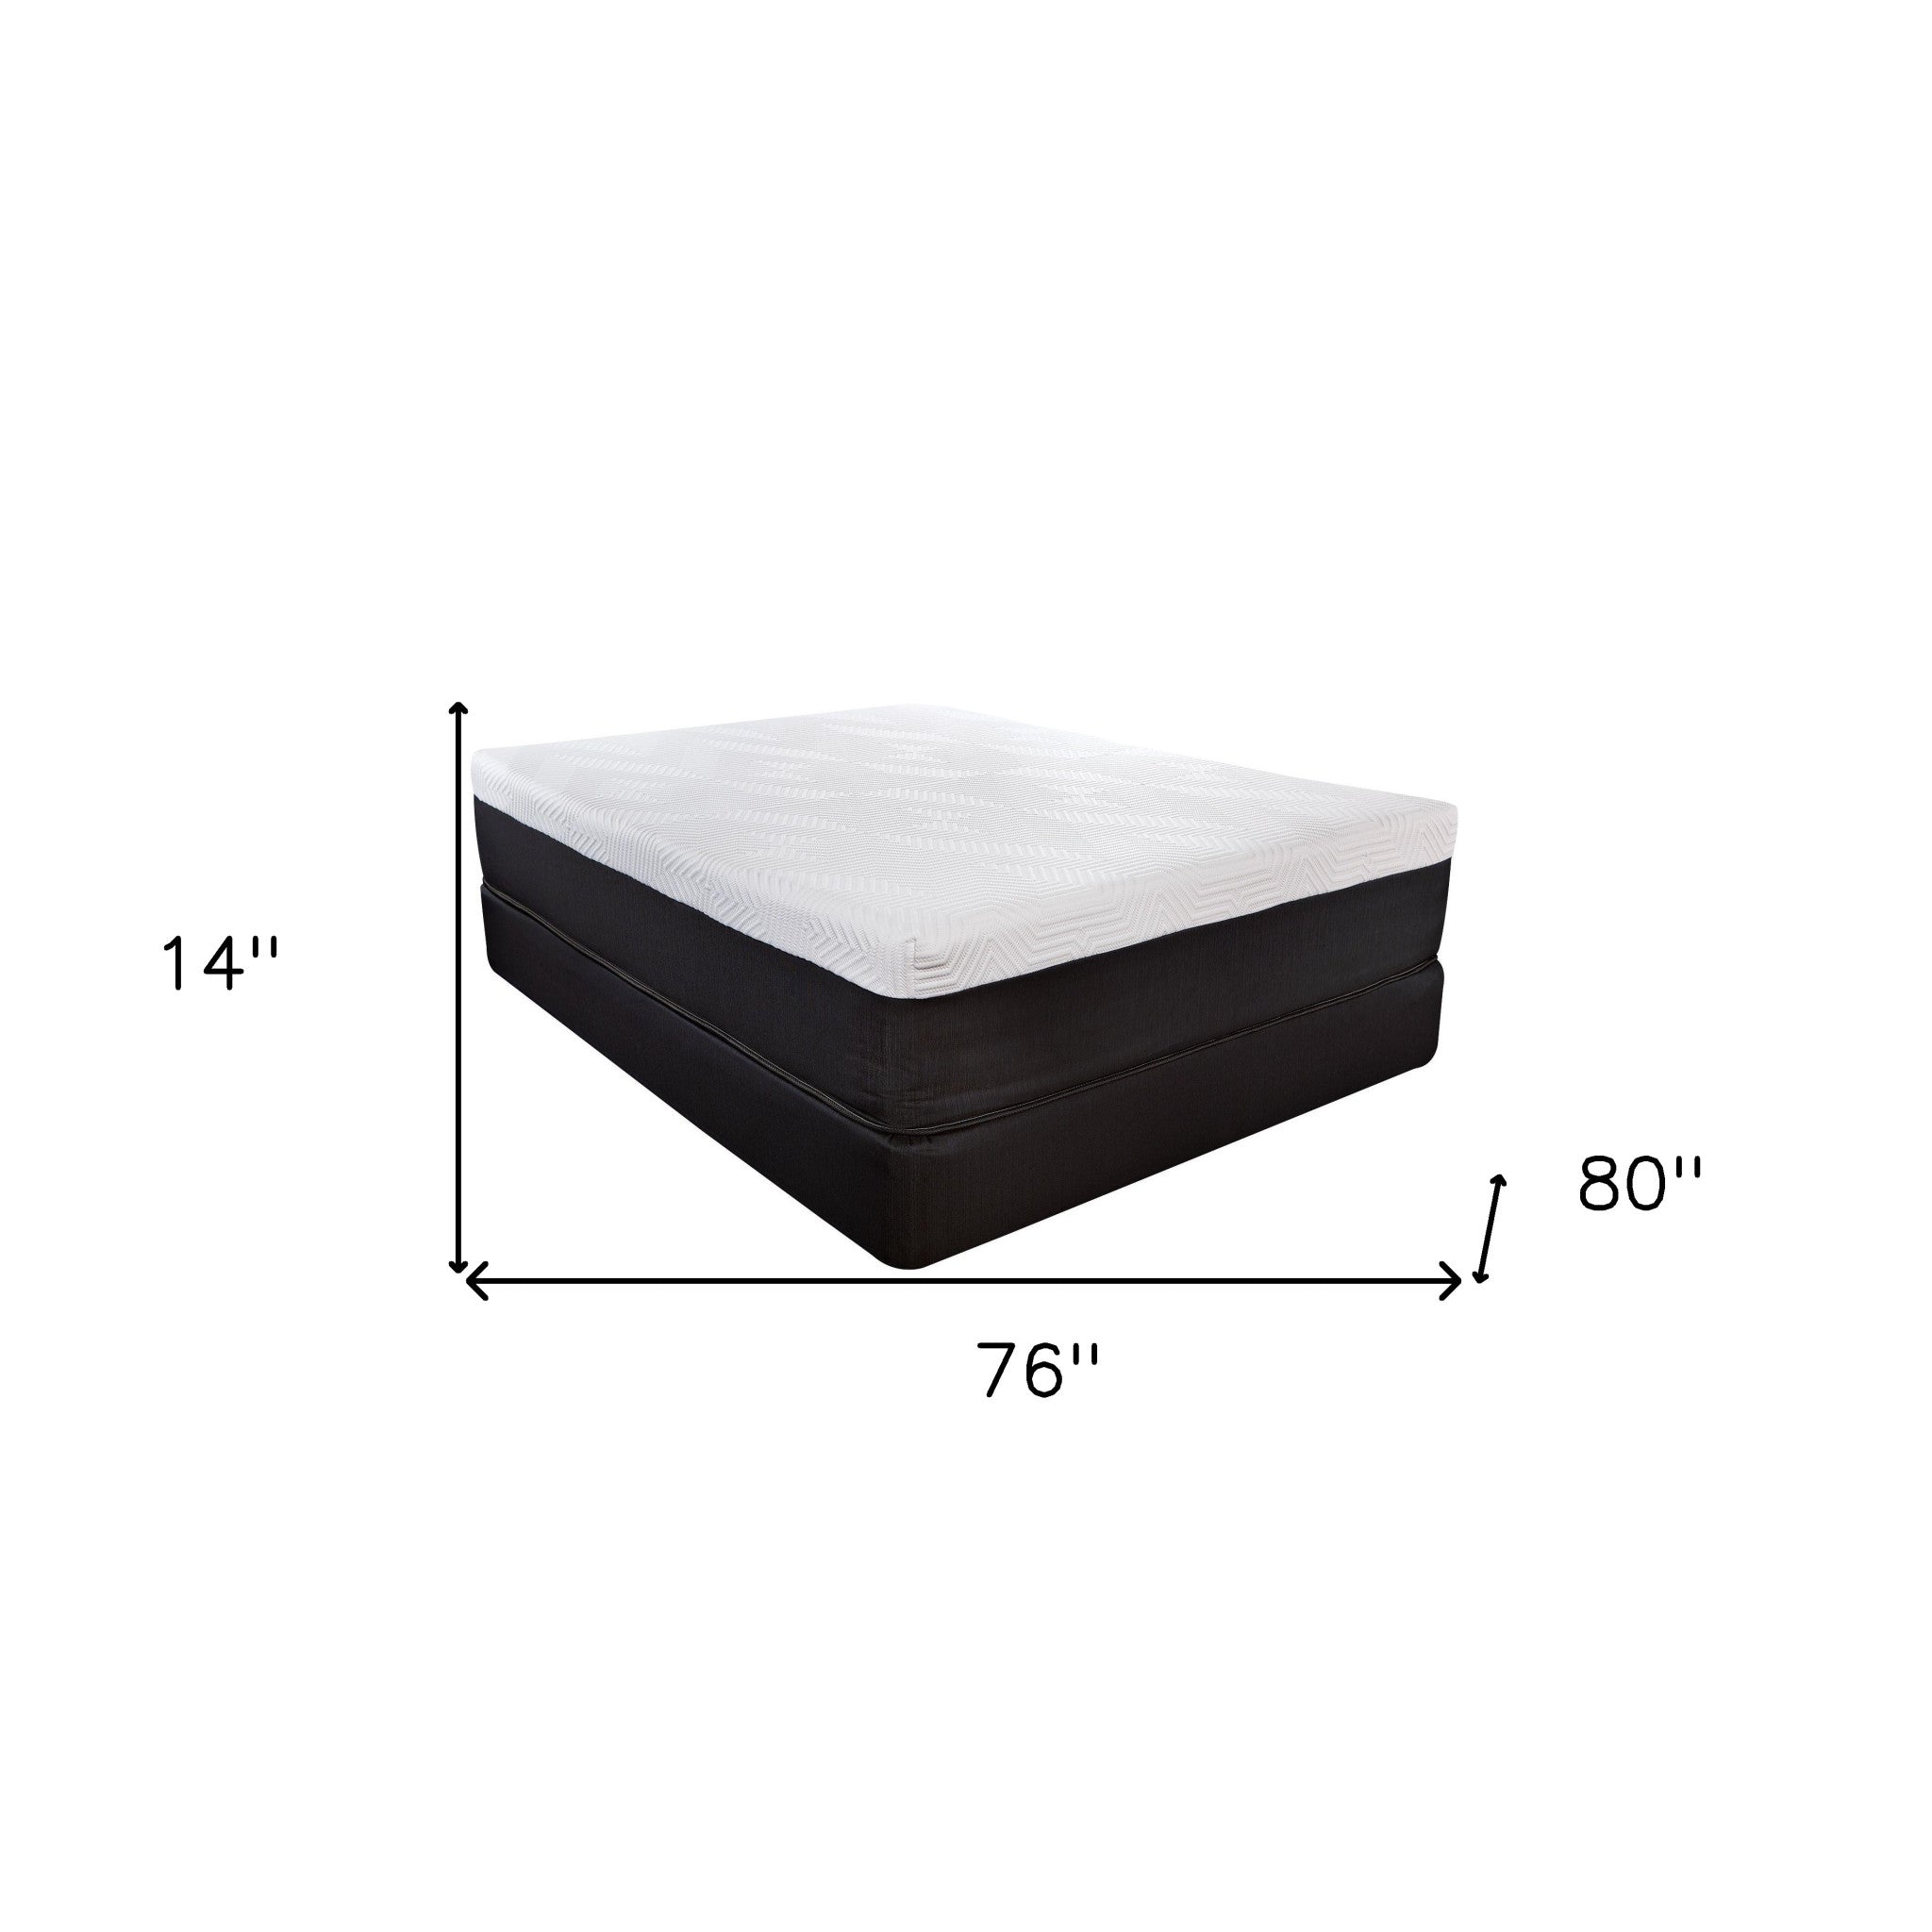 14" Hybrid Lux Memory Foam And Wrapped Coil Mattress Full